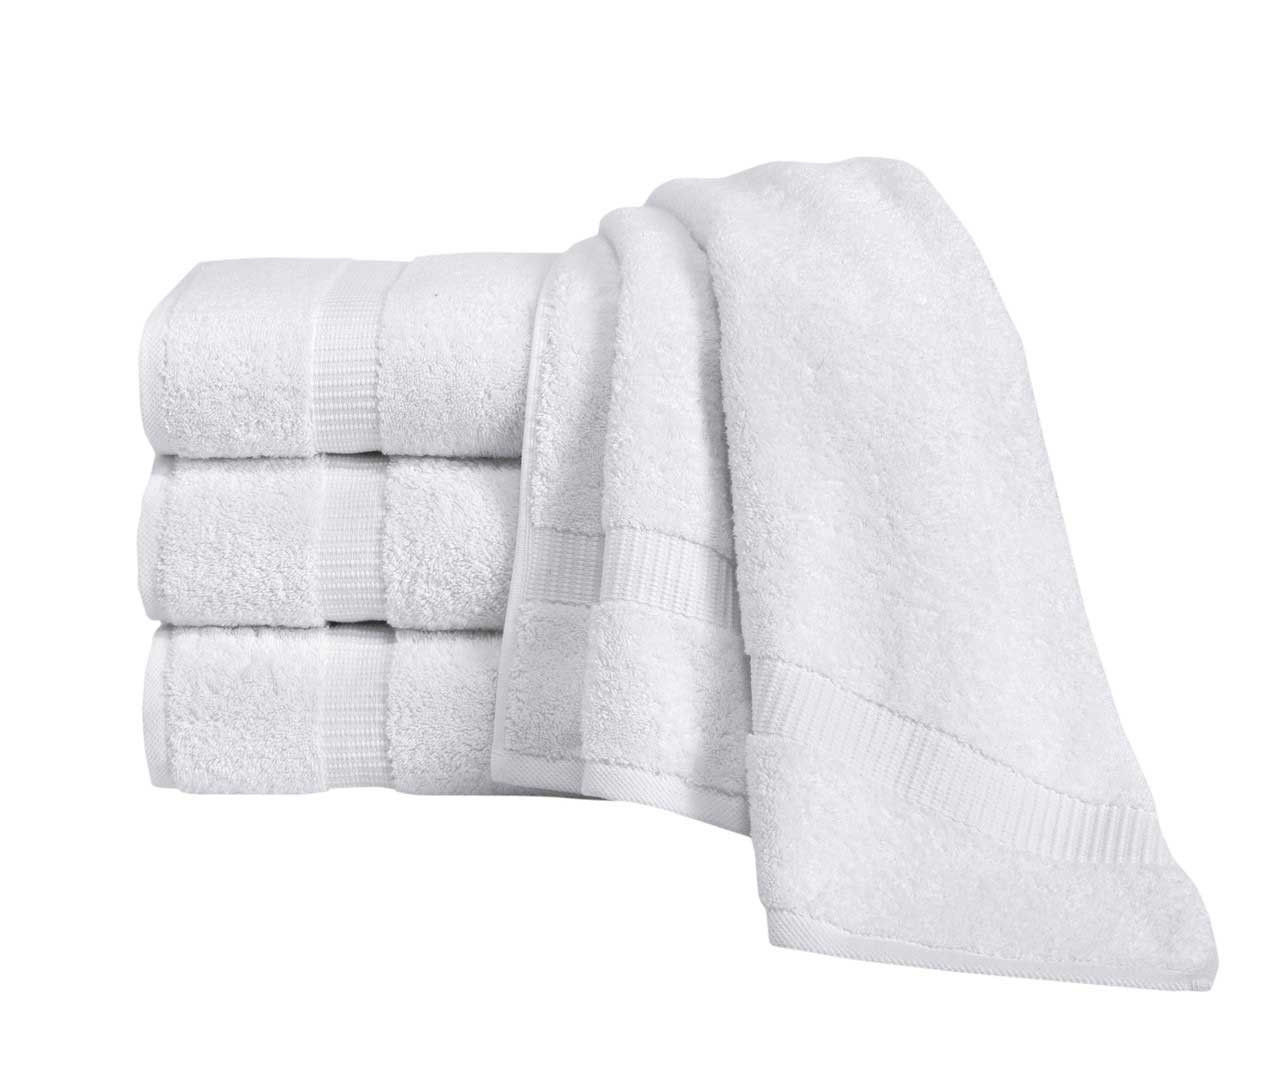 How should I care for my towels from the White Royal Turkish Towels Villa Collection to experience their true texture and softness?